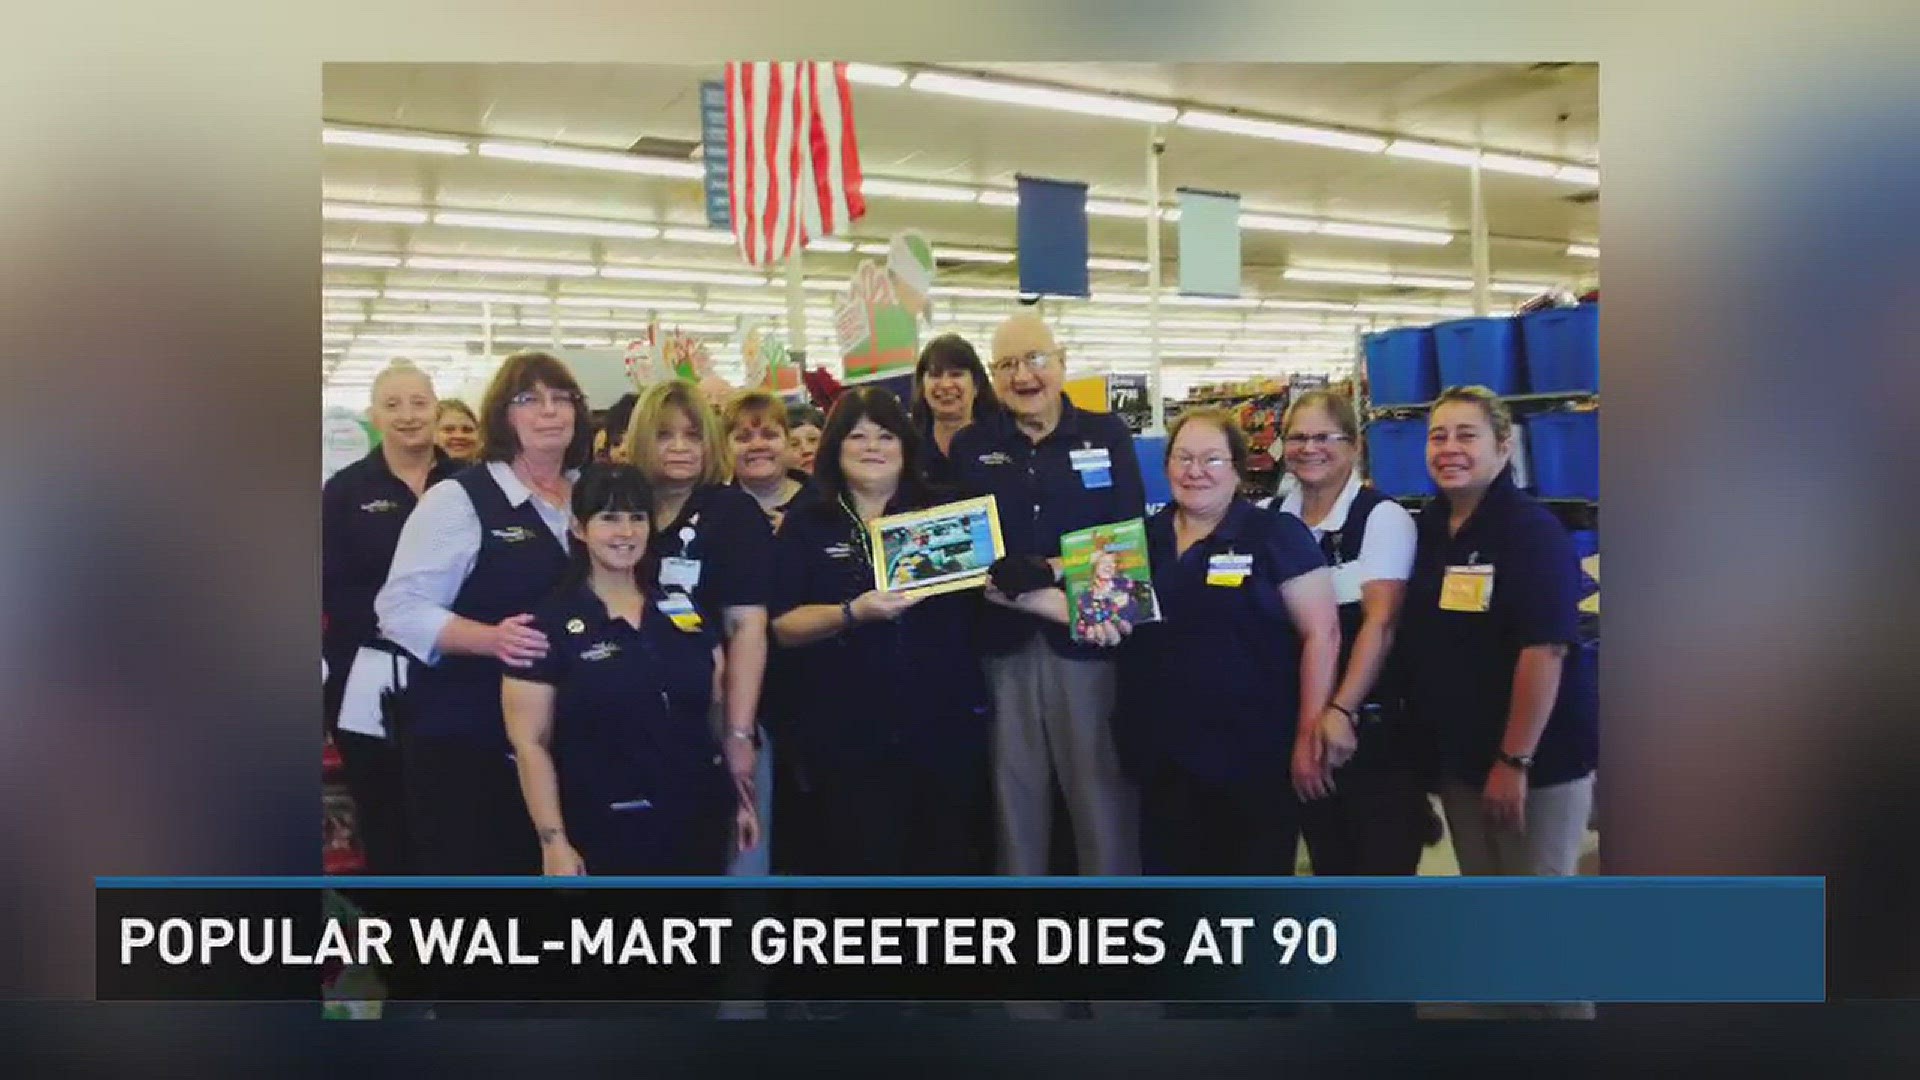 Archie Davidson worked at the Vidor Wal-Mart for 15 years as a door greeter; he passed away on Sunday